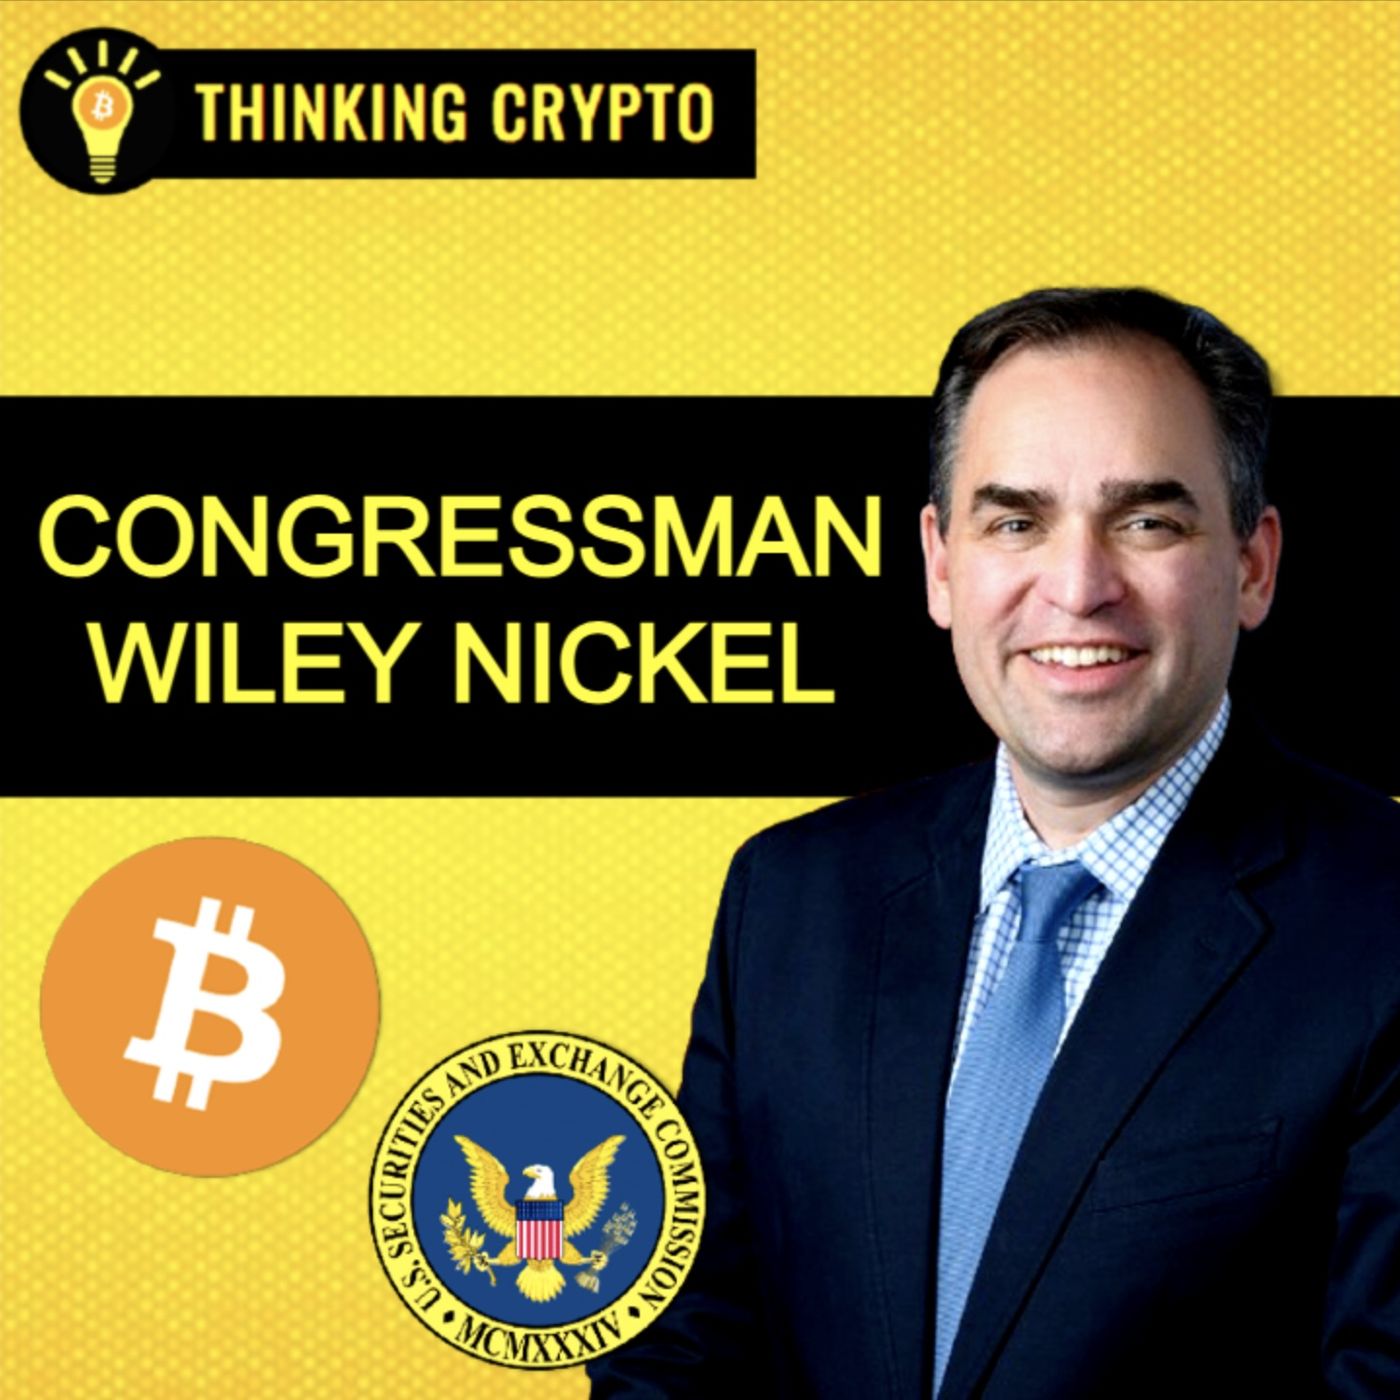 Congressman Wiley Nickel interview - Repealing The SECs SAB 121 & Fighting For Crypto Regulations